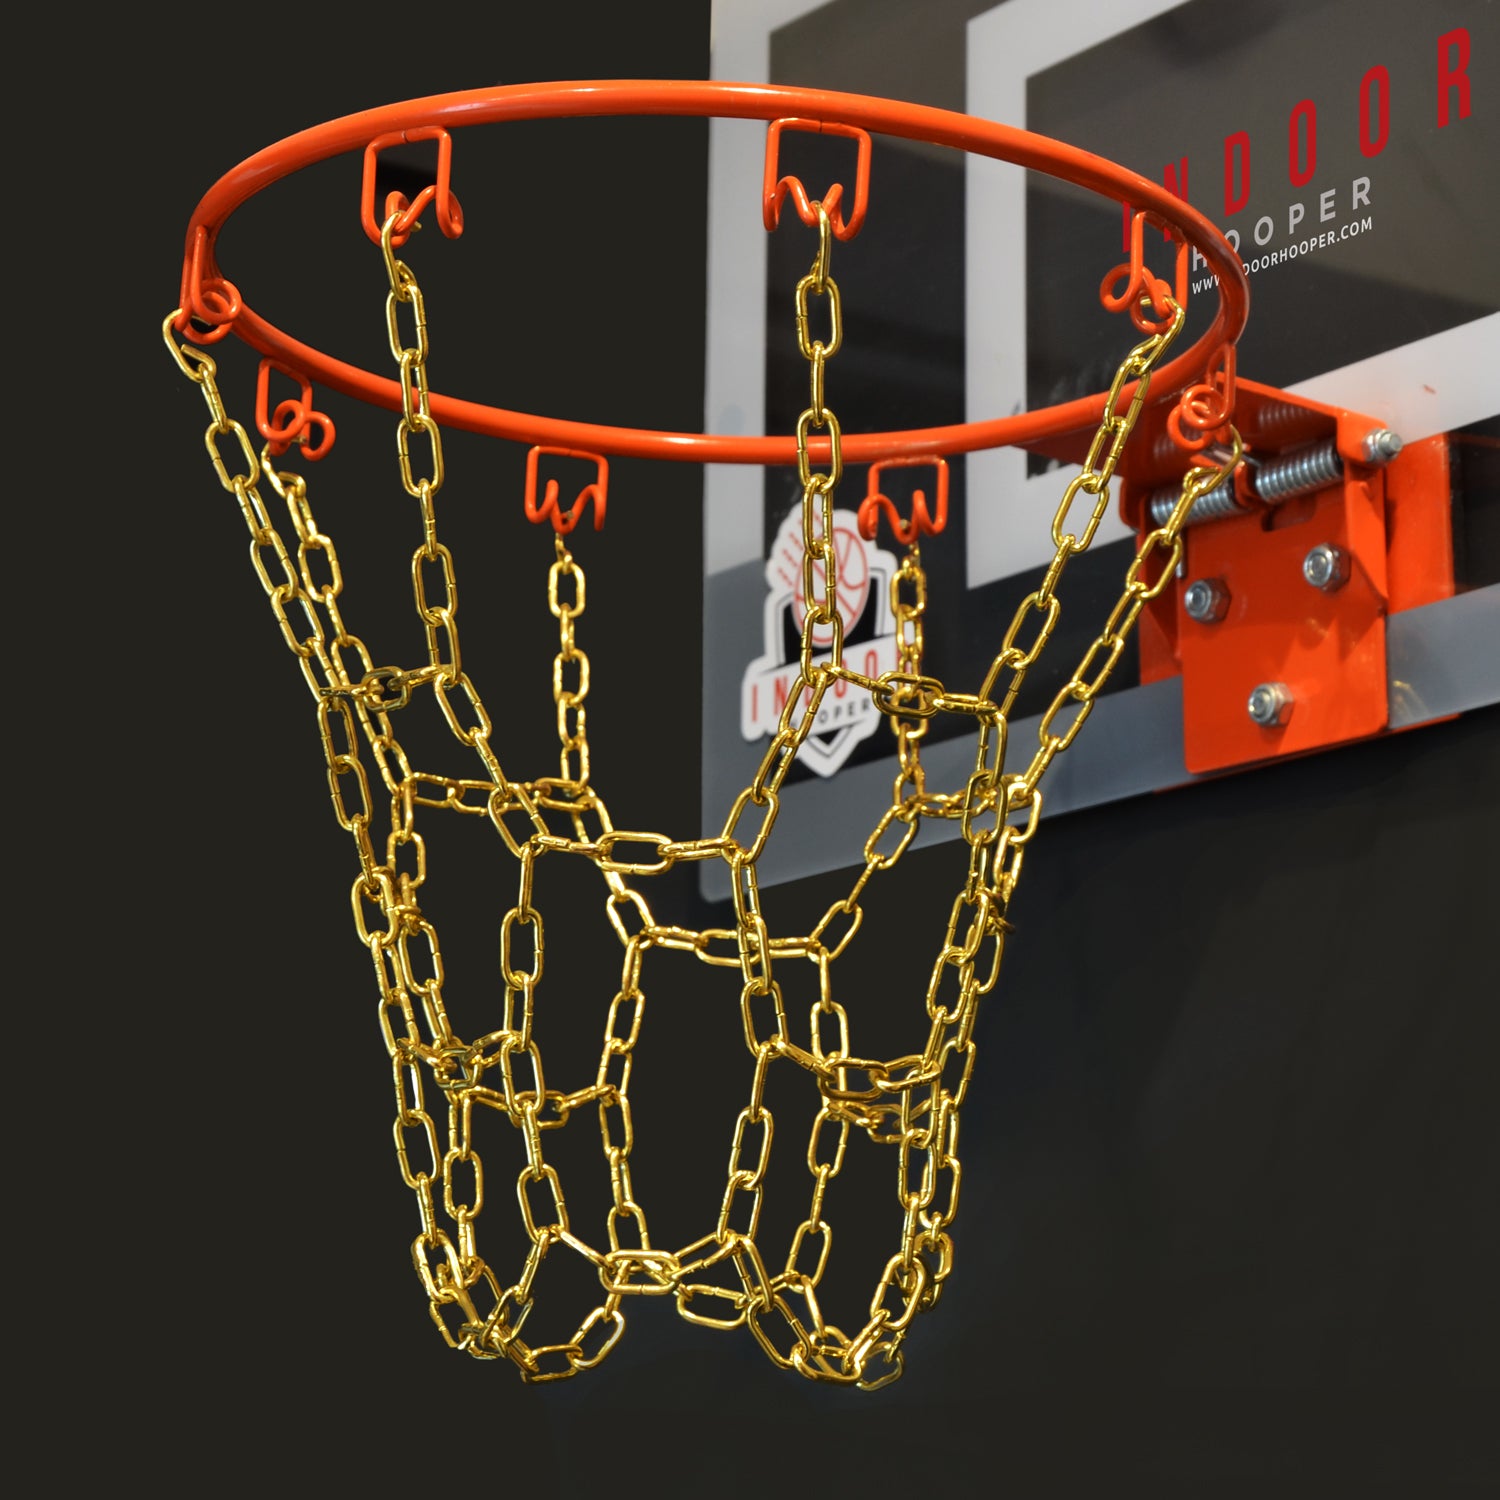 Load image into Gallery viewer, Deluxe Mini Basketball Chain Net - Gold Edition - Sizes: XS, S, M, L, XL
